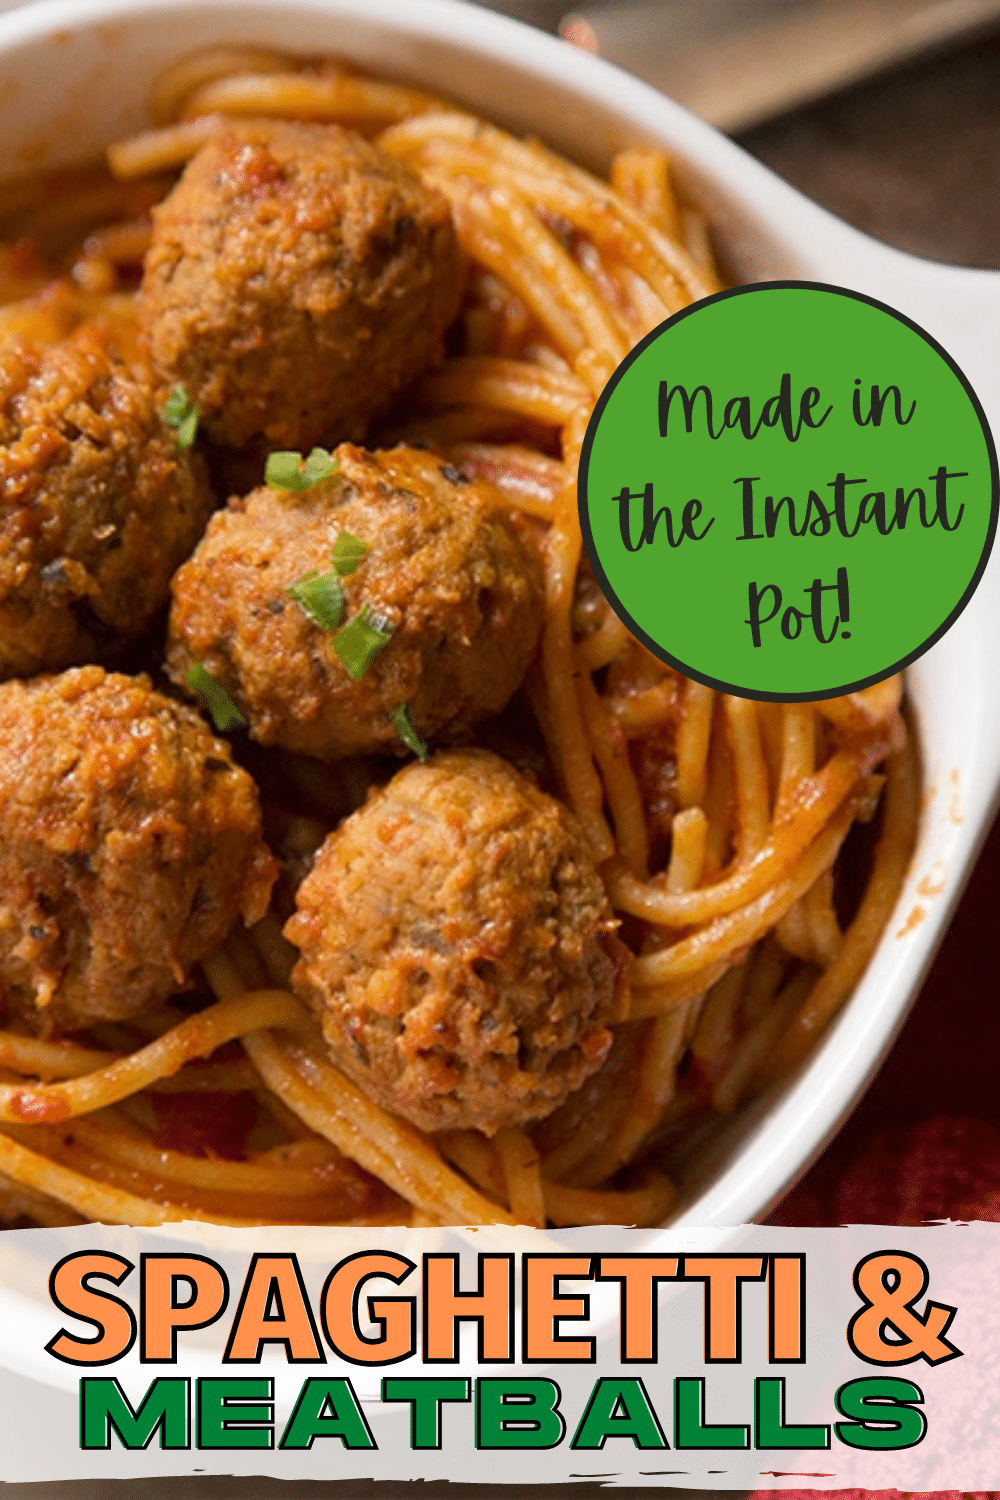 Instant Pot Spaghetti and Meatballs is the perfect meal for busy weeknights when you need a fast, easy dinner the kids will eat without complaints! This recipe is super simple and you can always keep the ingredients on hand so you'll never be tempted to hit the drive-through or order in. #instantpotrecipes #easydinner #spaghettiandmeatballs via @wondermomwannab